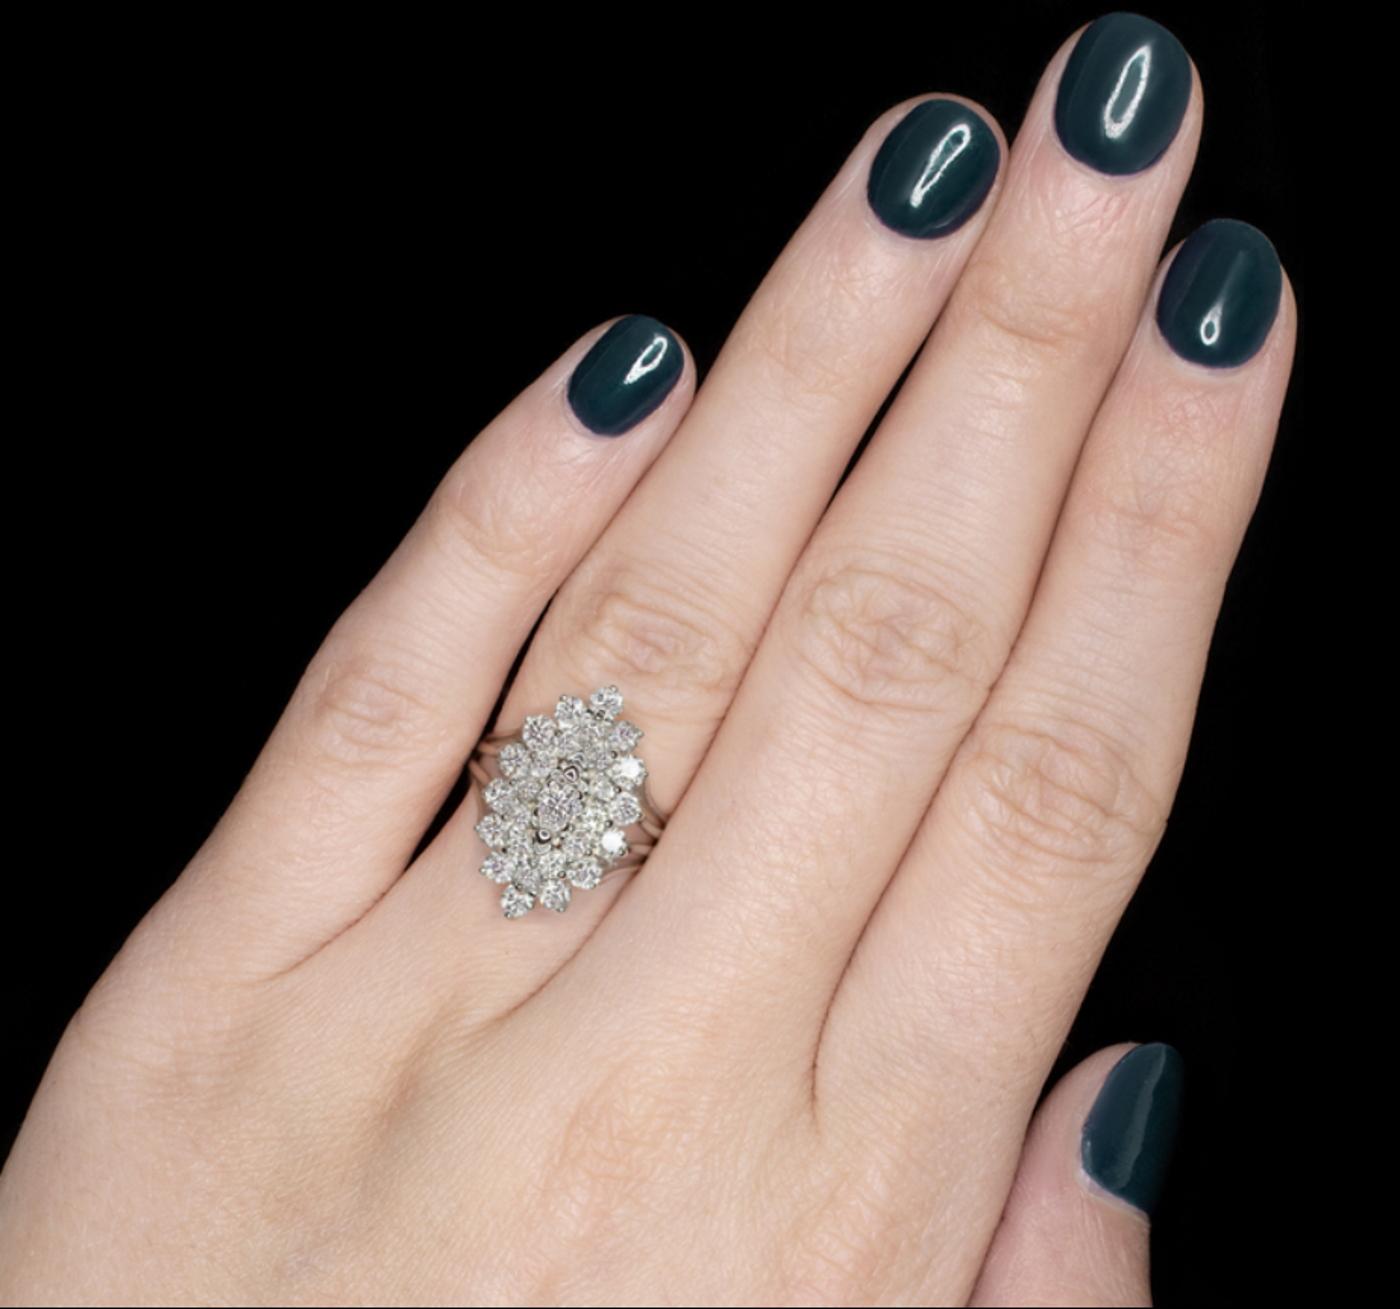 Diamond cluster ring is glamorously big and brilliant, so dazzling with sparkle it could catch your eye from across the room! Set in a dazzling cluster, the 2.25 carats of vibrant natural diamonds offer an eye catching, brilliant display! All bright